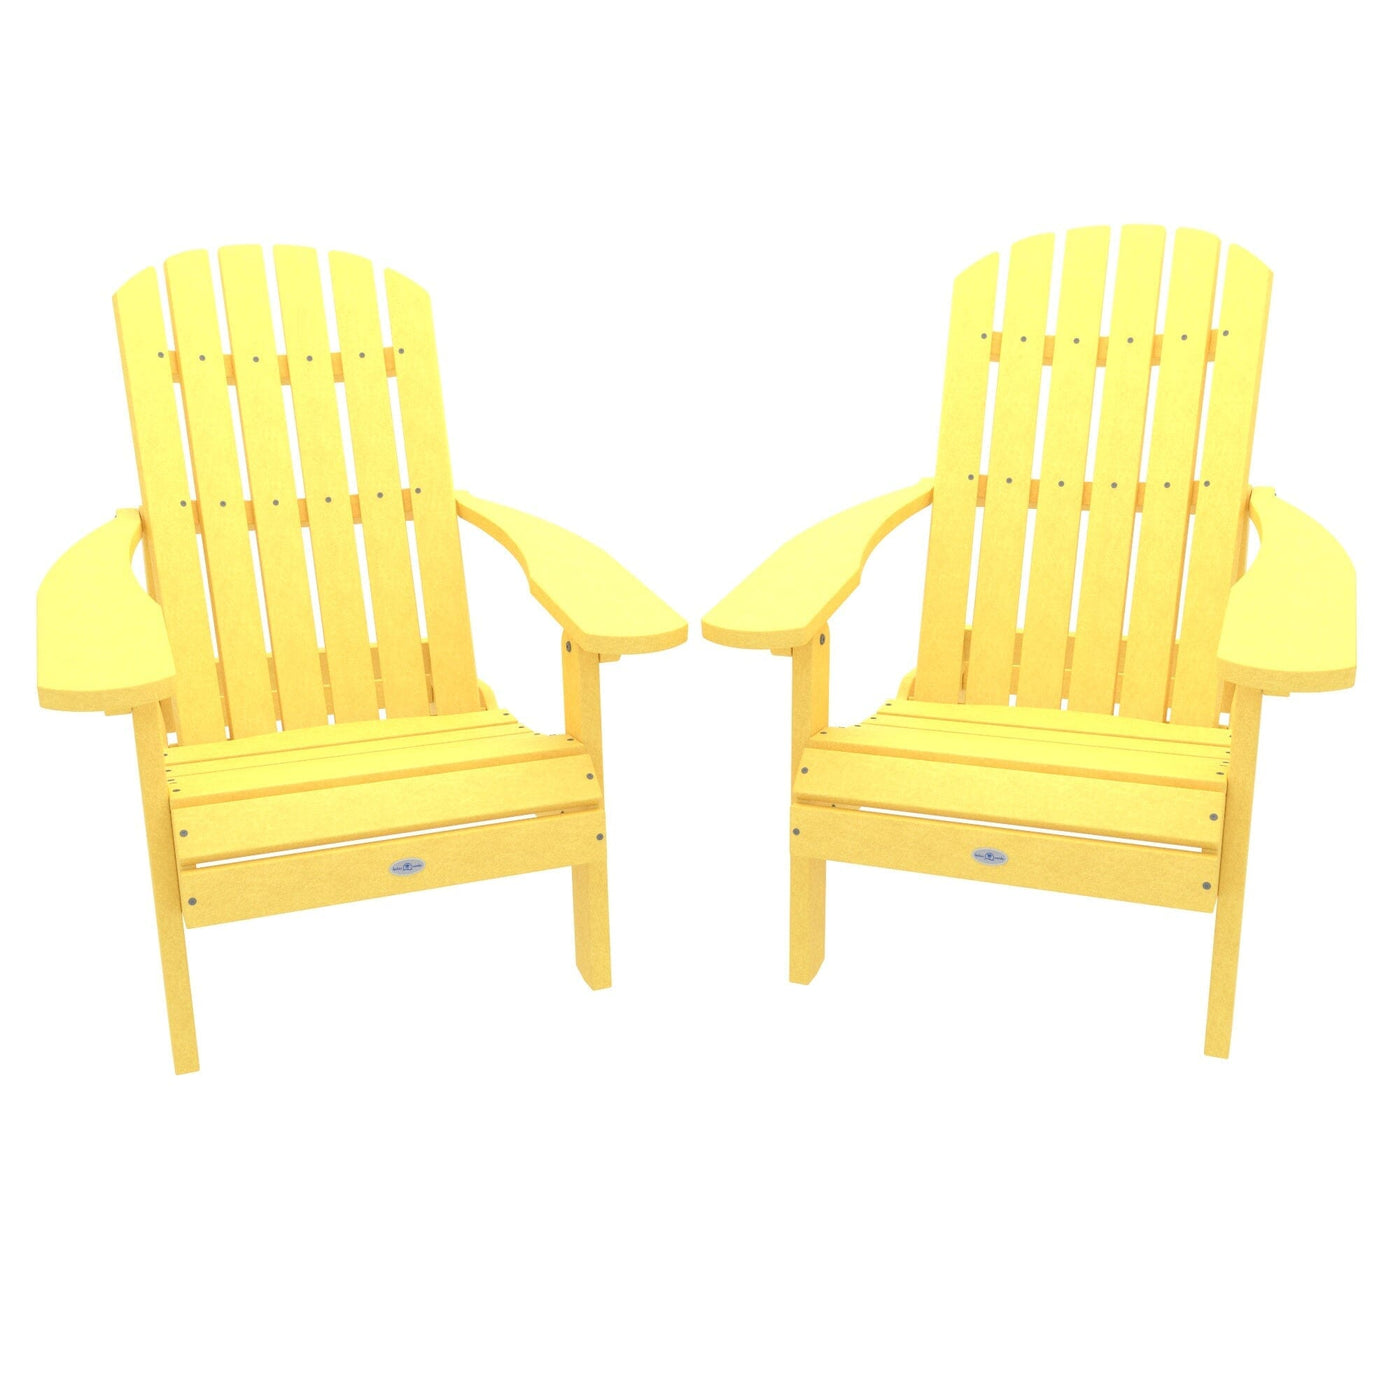 Cape Folding and Reclining Adirondack Chair (Set of 2) Kitted Set Bahia Verde Outdoors Sunbeam Yellow 